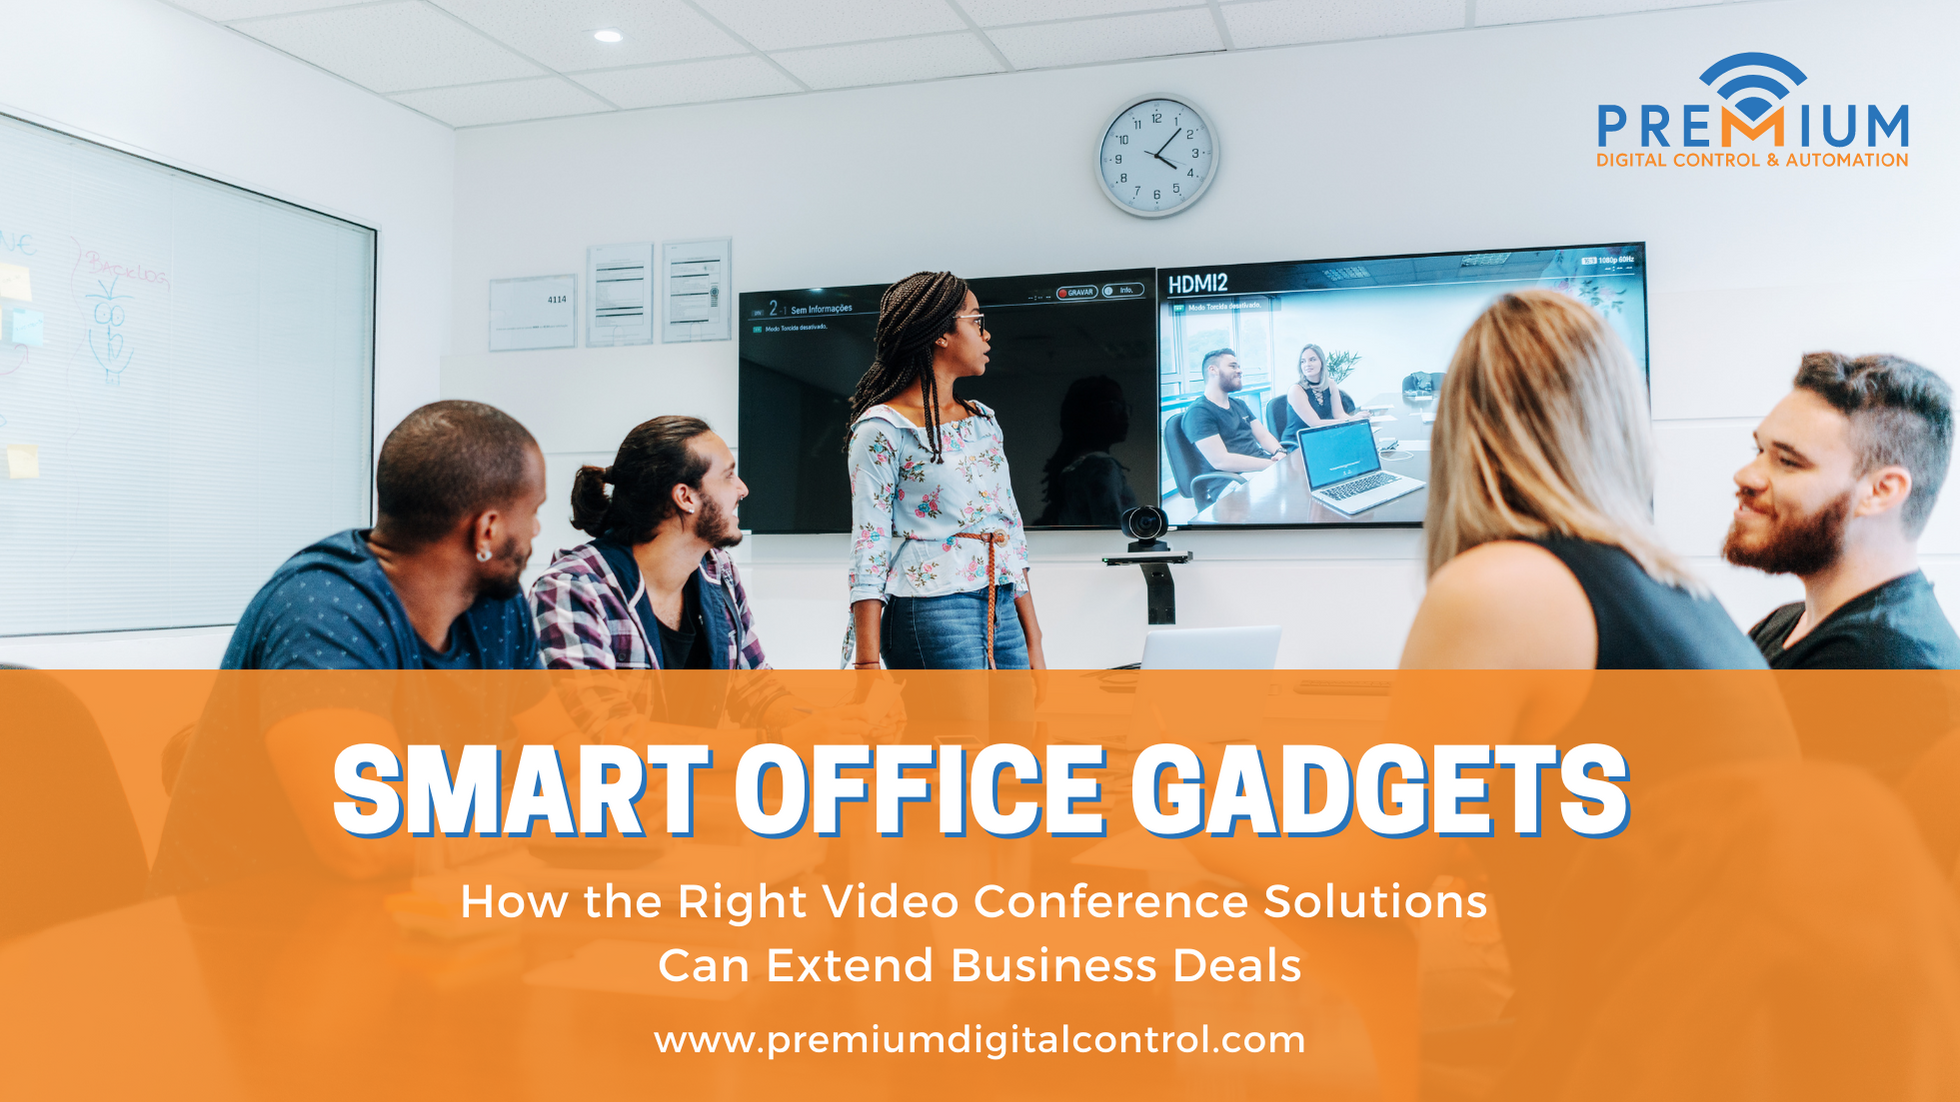 How the Right Video Conference Solutions Can Extend Business Deals